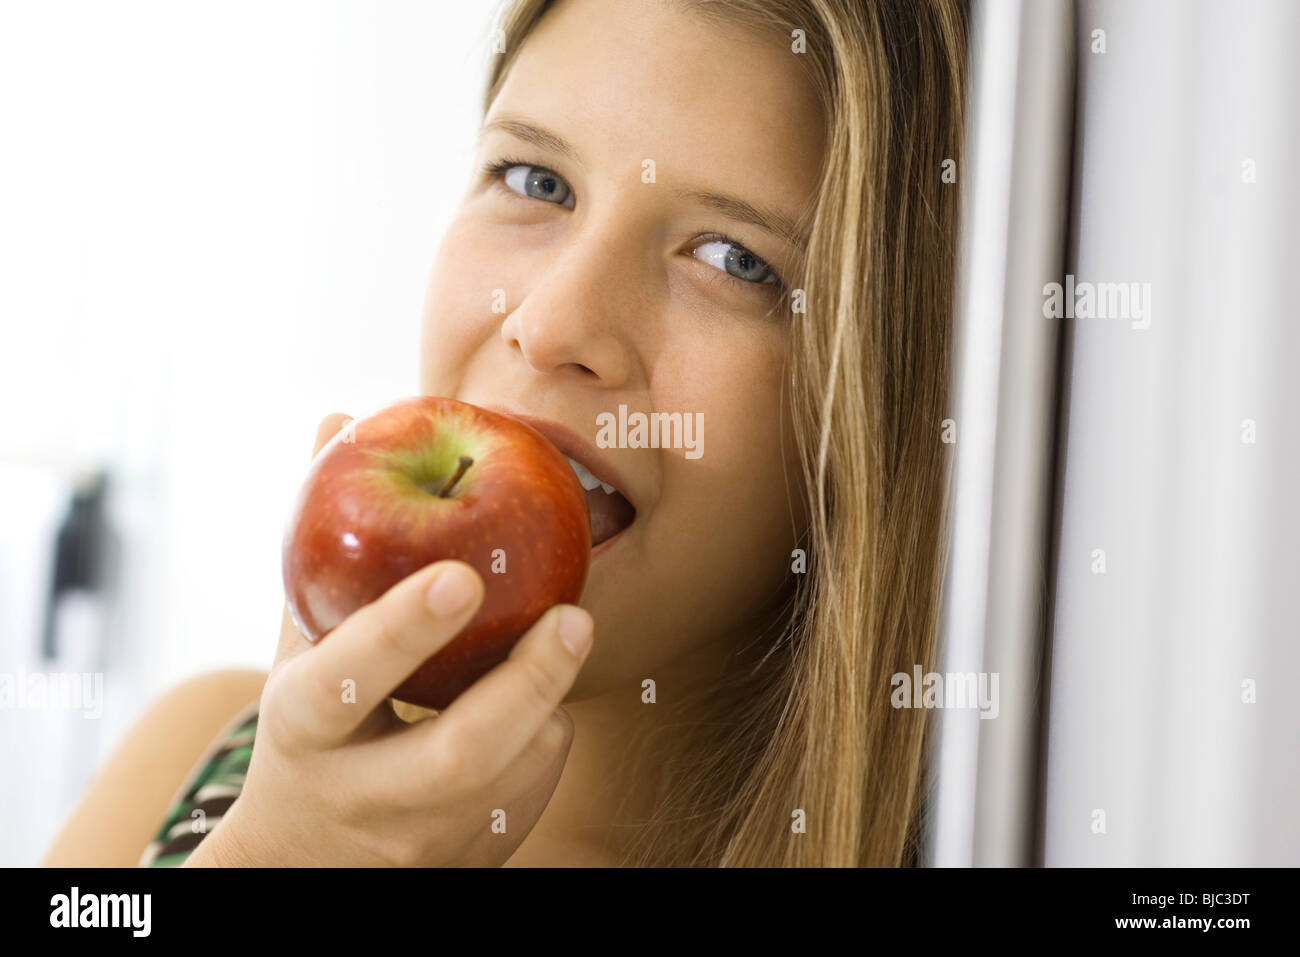 Young woman biting into apple Stock Photo